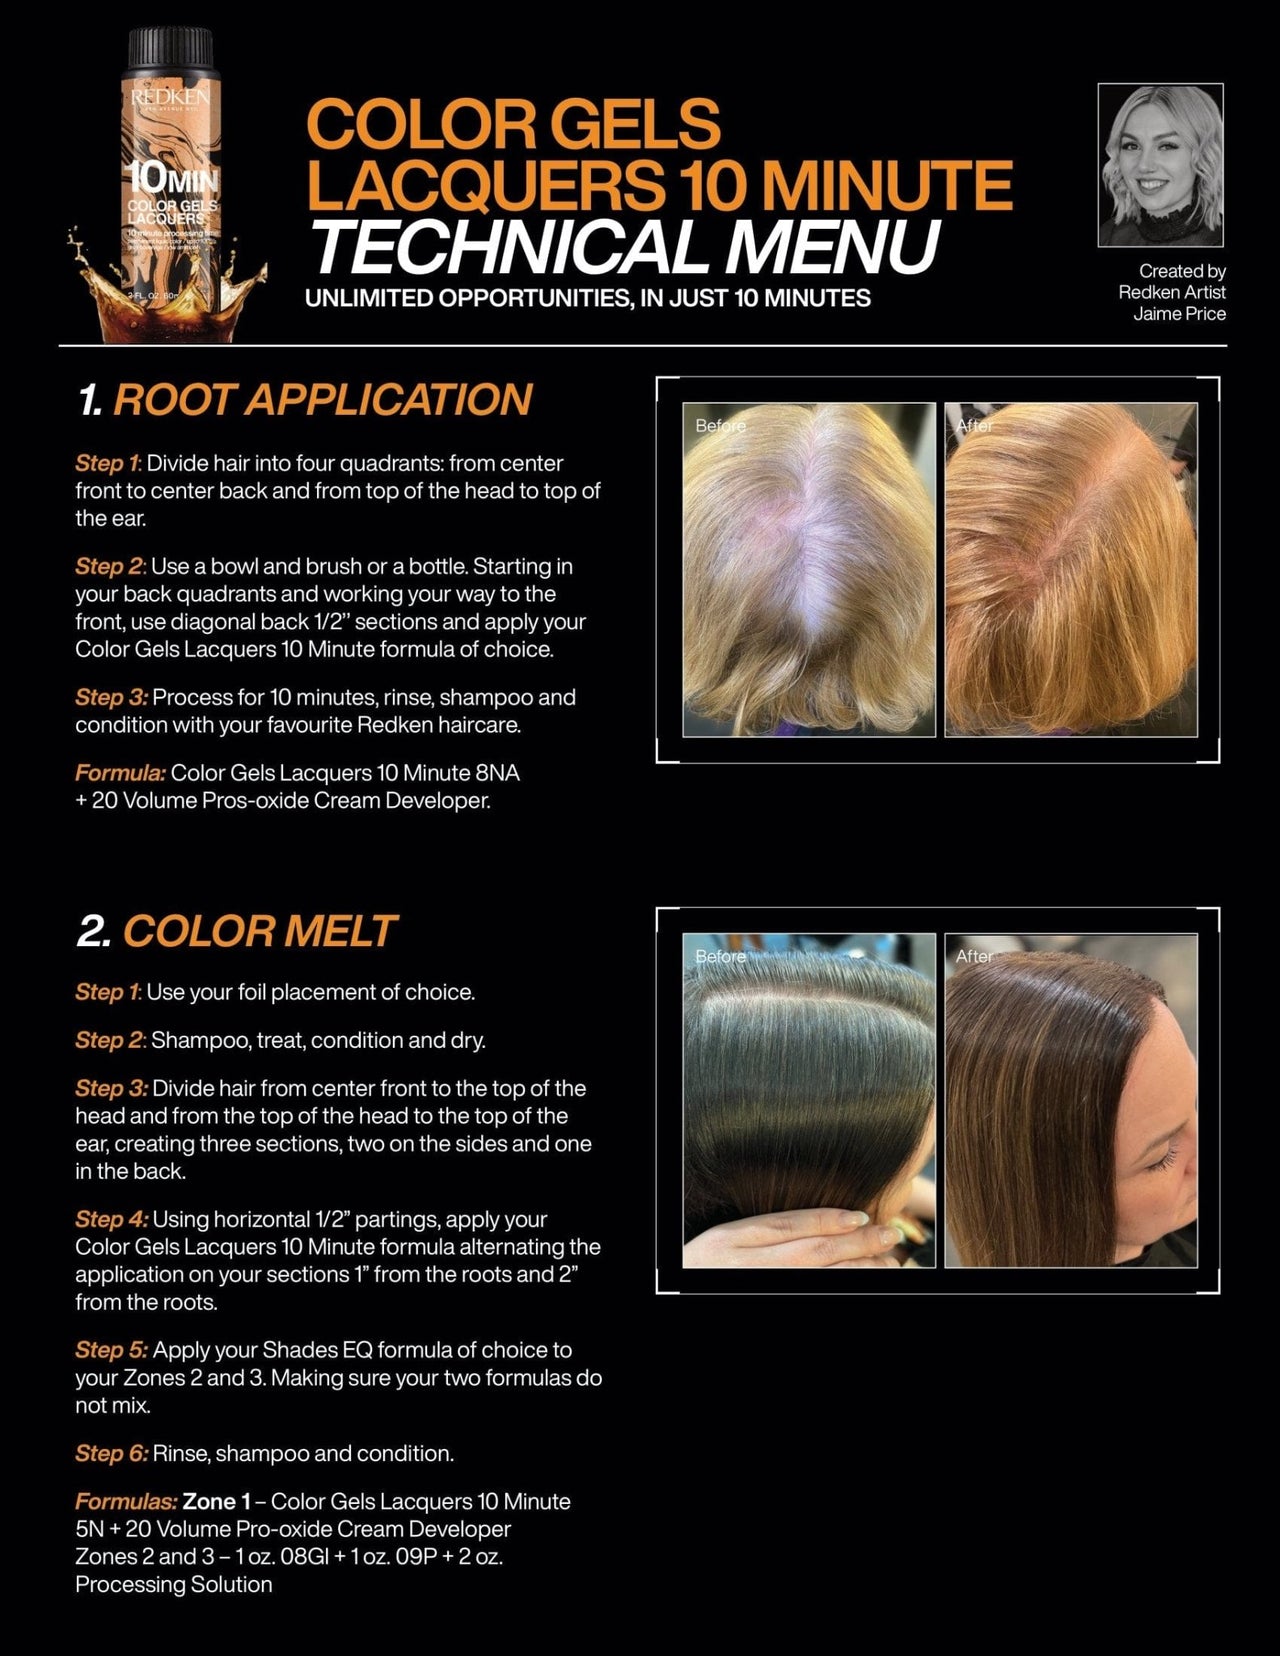 REDKEN - COLOR GELS_Color Gel Lacquers 10 minutes 4ABn Dark Roast_Cosmetic World